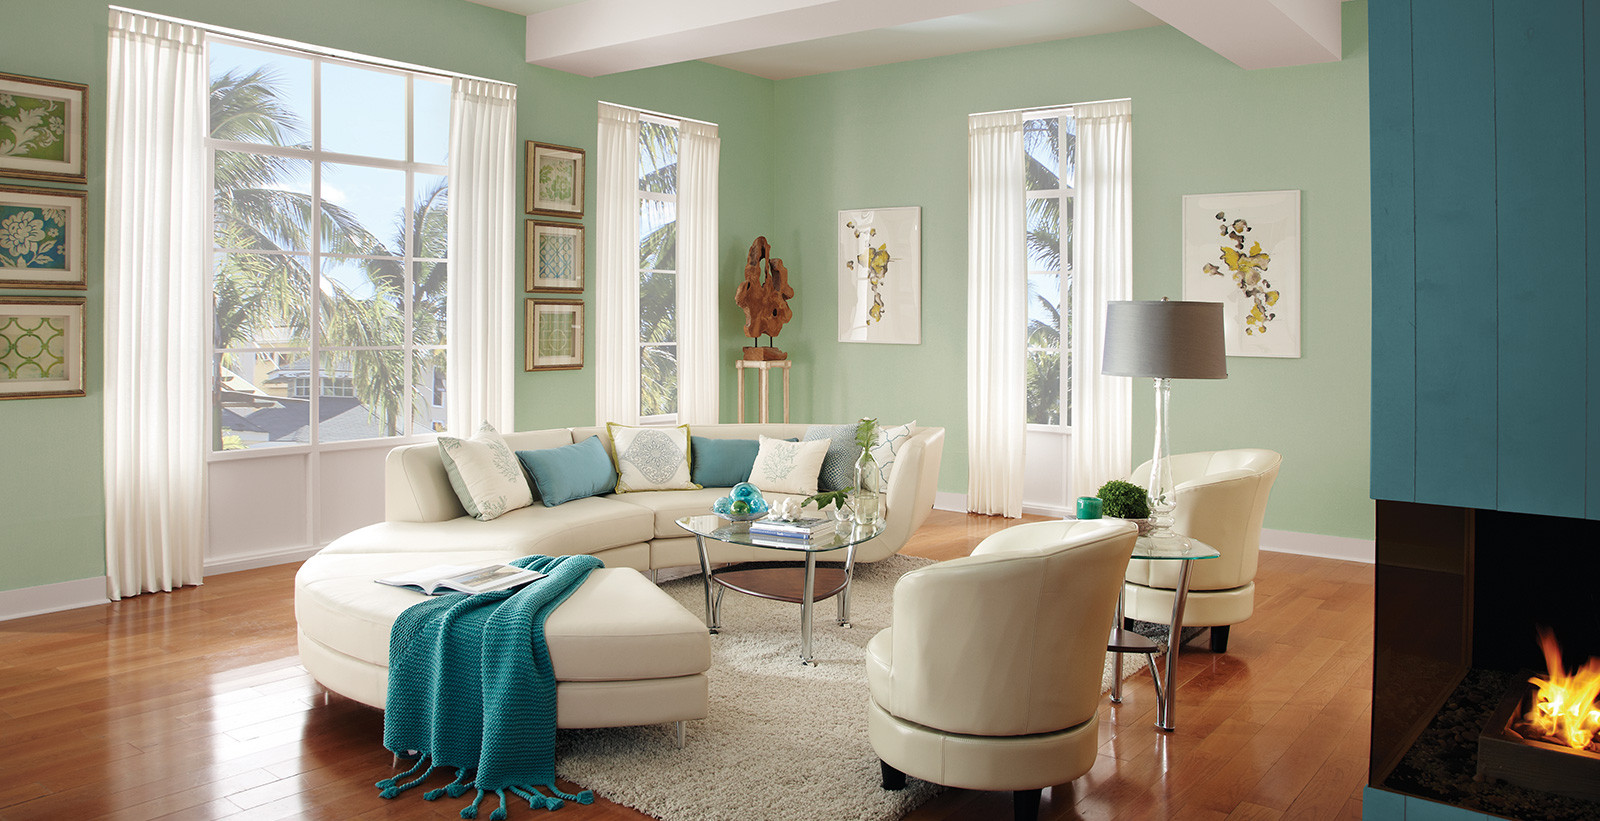 Popular Living Room Colors 2020
 Calming Living Room Ideas and Inspirational Paint Colors